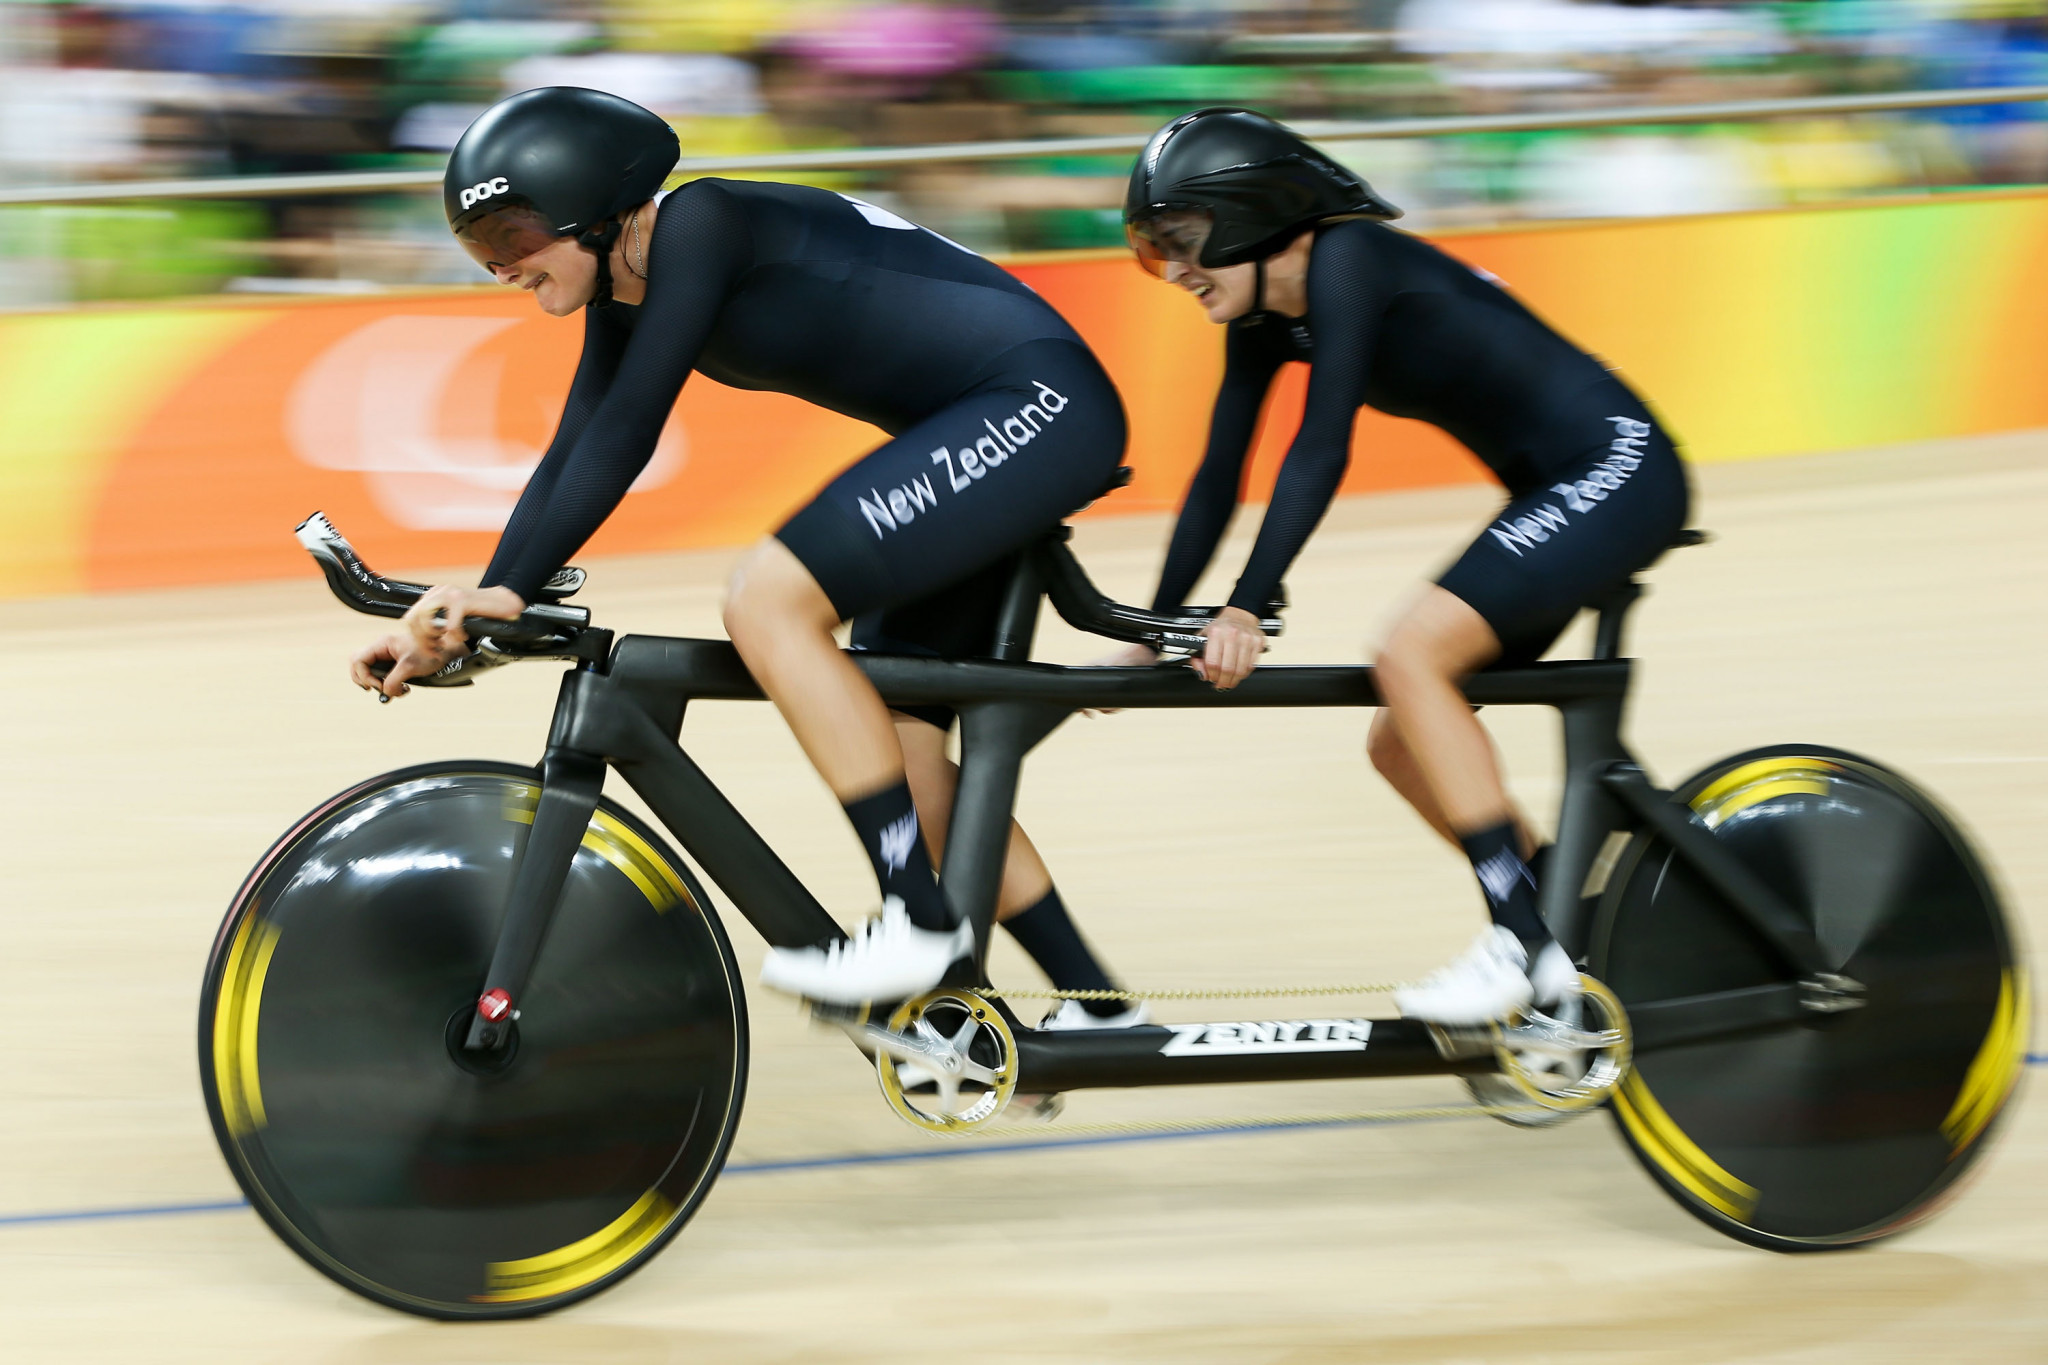 Amanda Cameron and Hannah van Kampen will compete for New Zealand at the 2019 UCI Para Cycling Track World Championships ©Getty Images